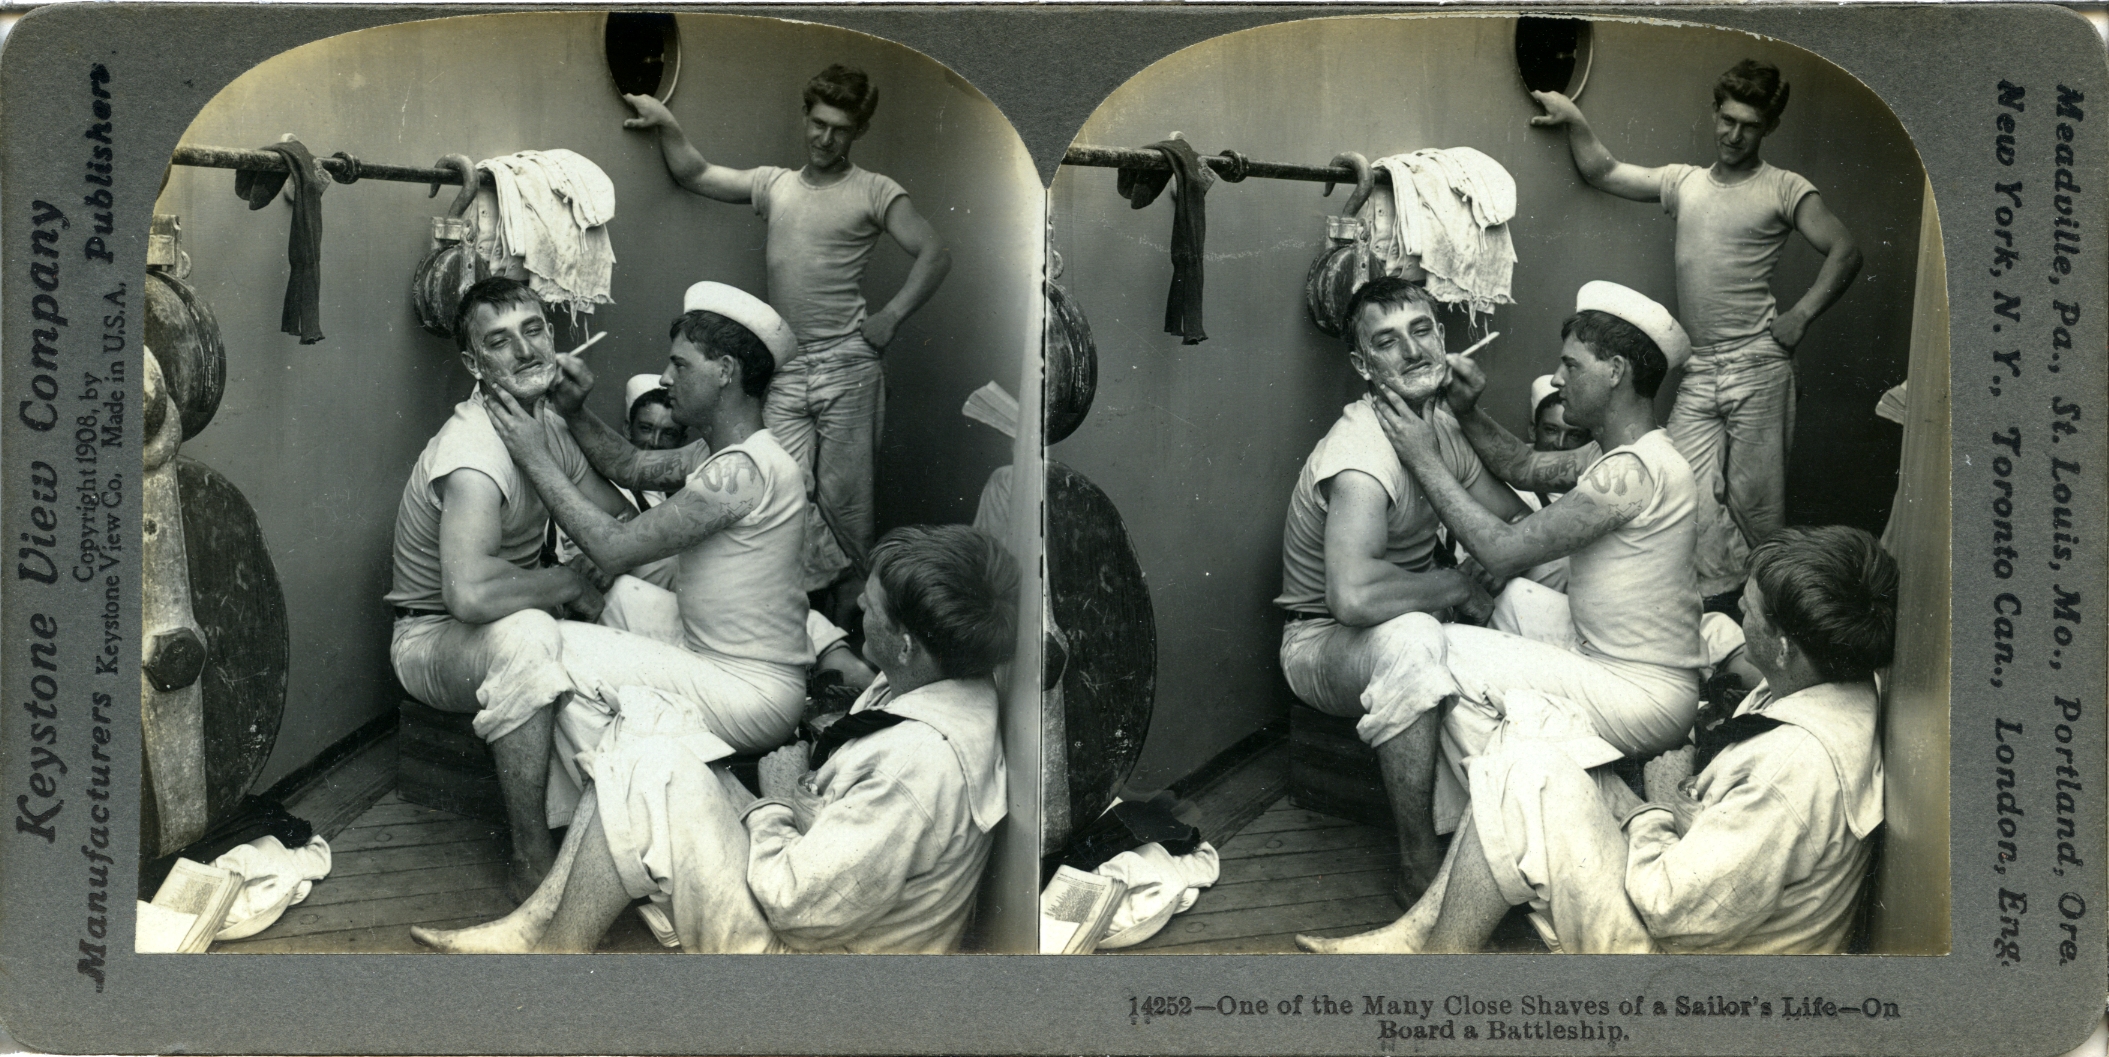 One of the Many Close Shaves of a Sailor's Life - On Board a Battleship